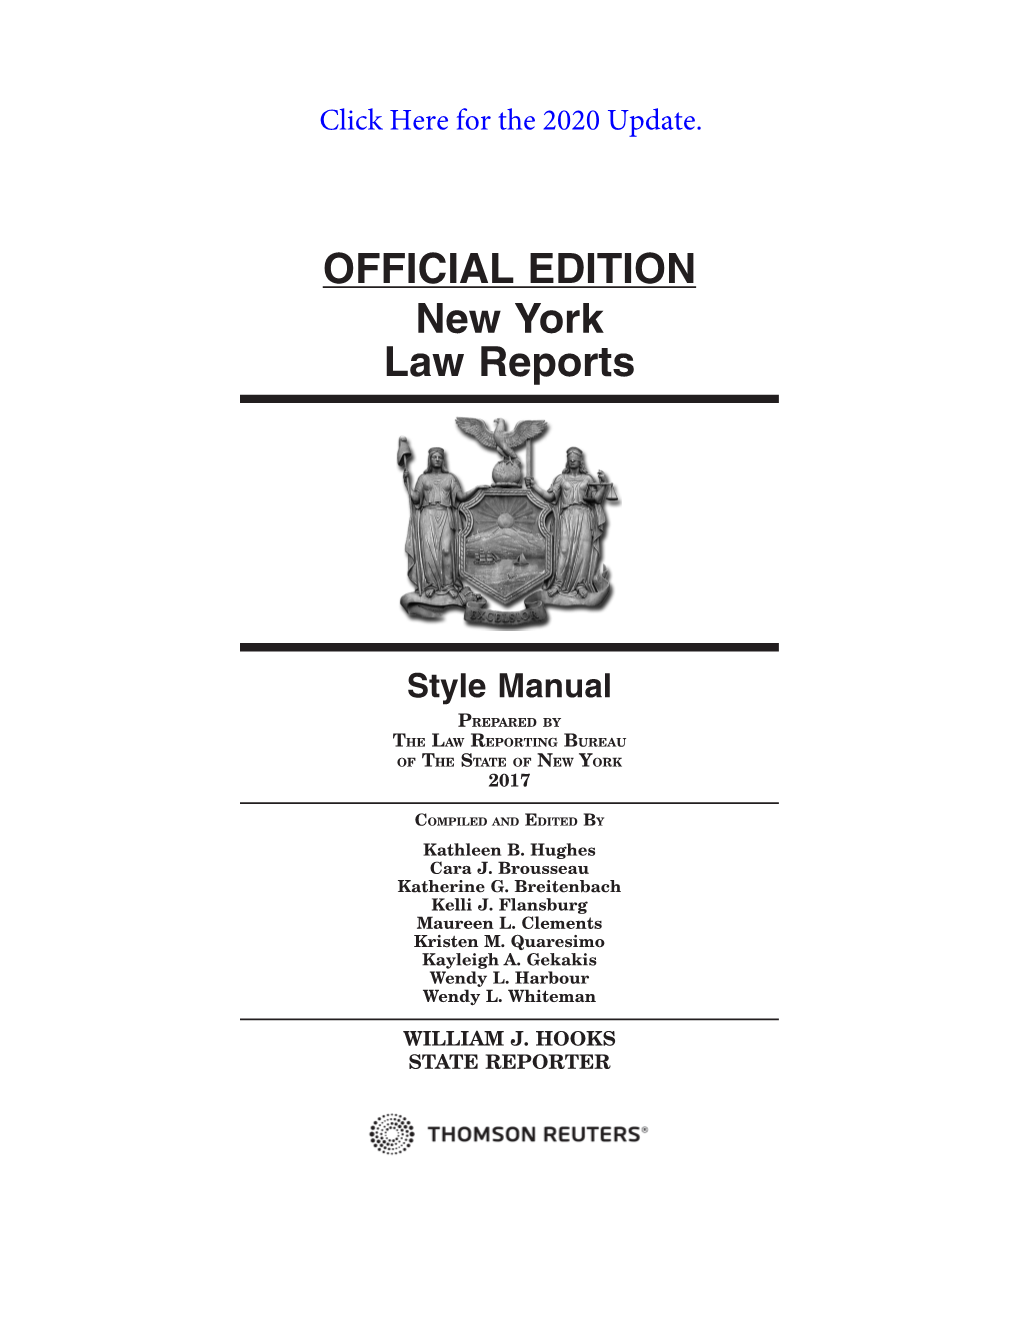 OFFICIAL EDITION New York Law Reports